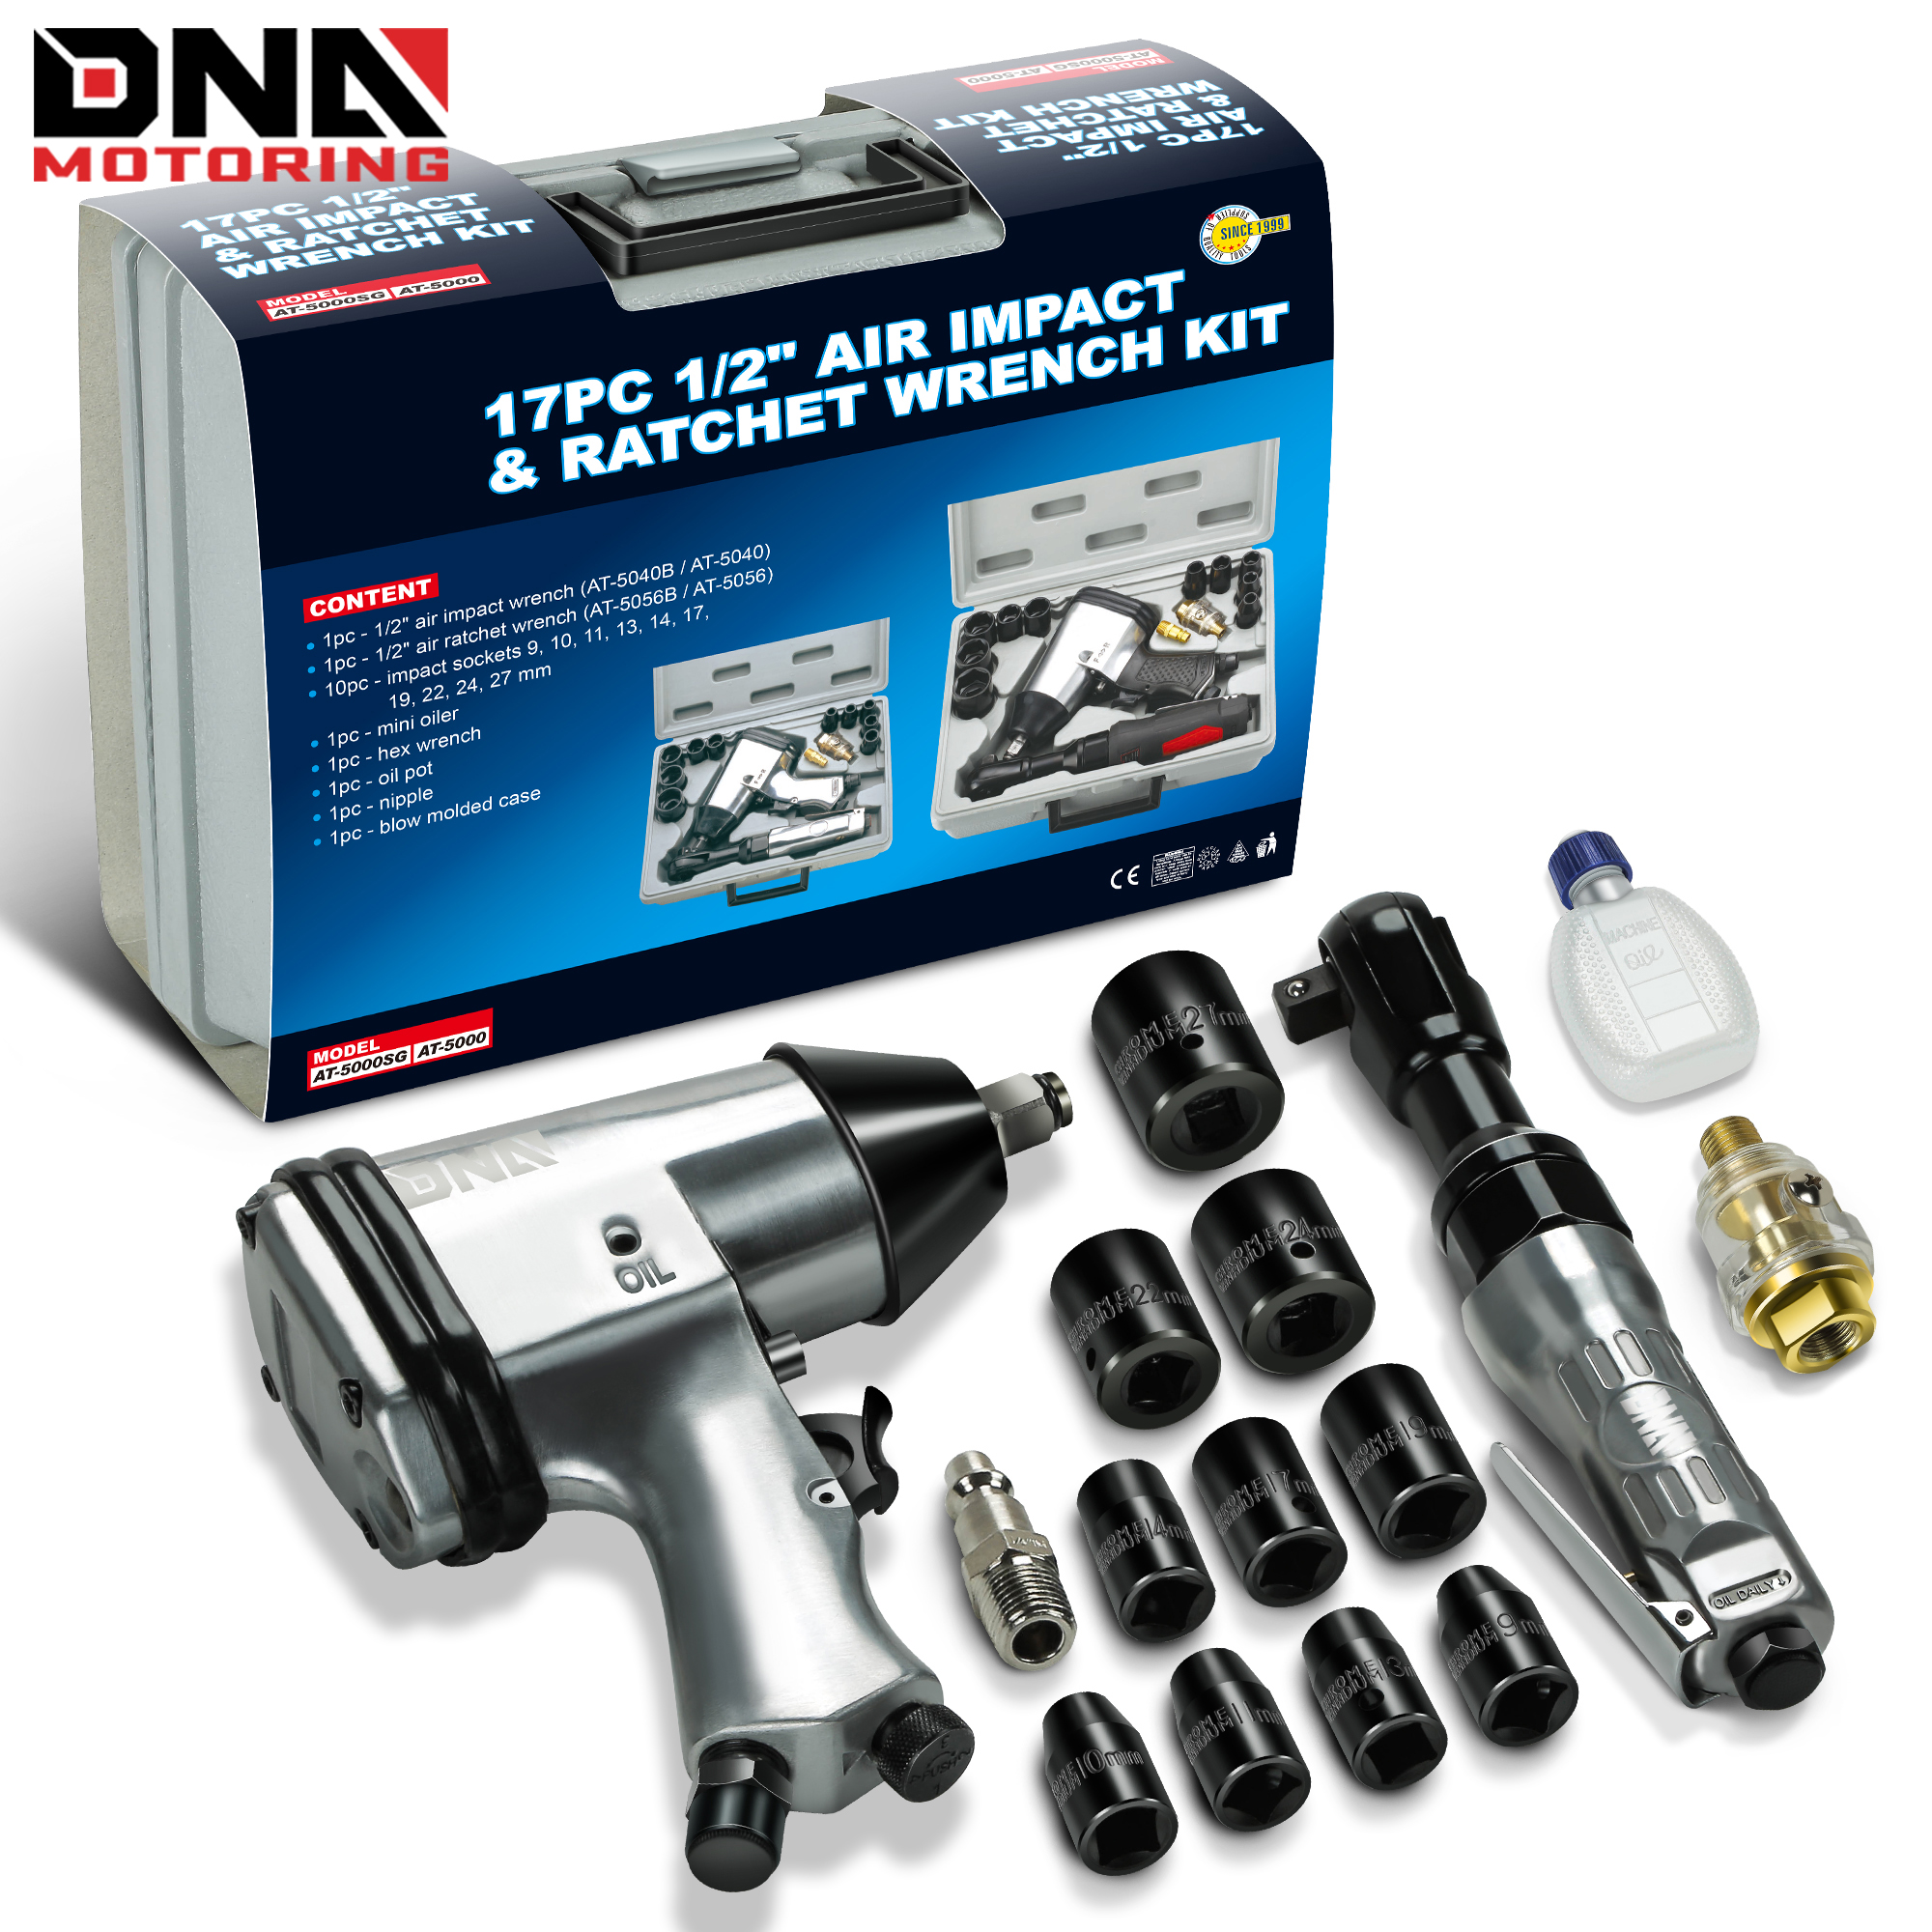 

17pc Kit 1/2-inch Pneumatic Air Impact & Ratchet Wrench Kit Torque Wrench For Repairs, W/ Case, Sliver / Black